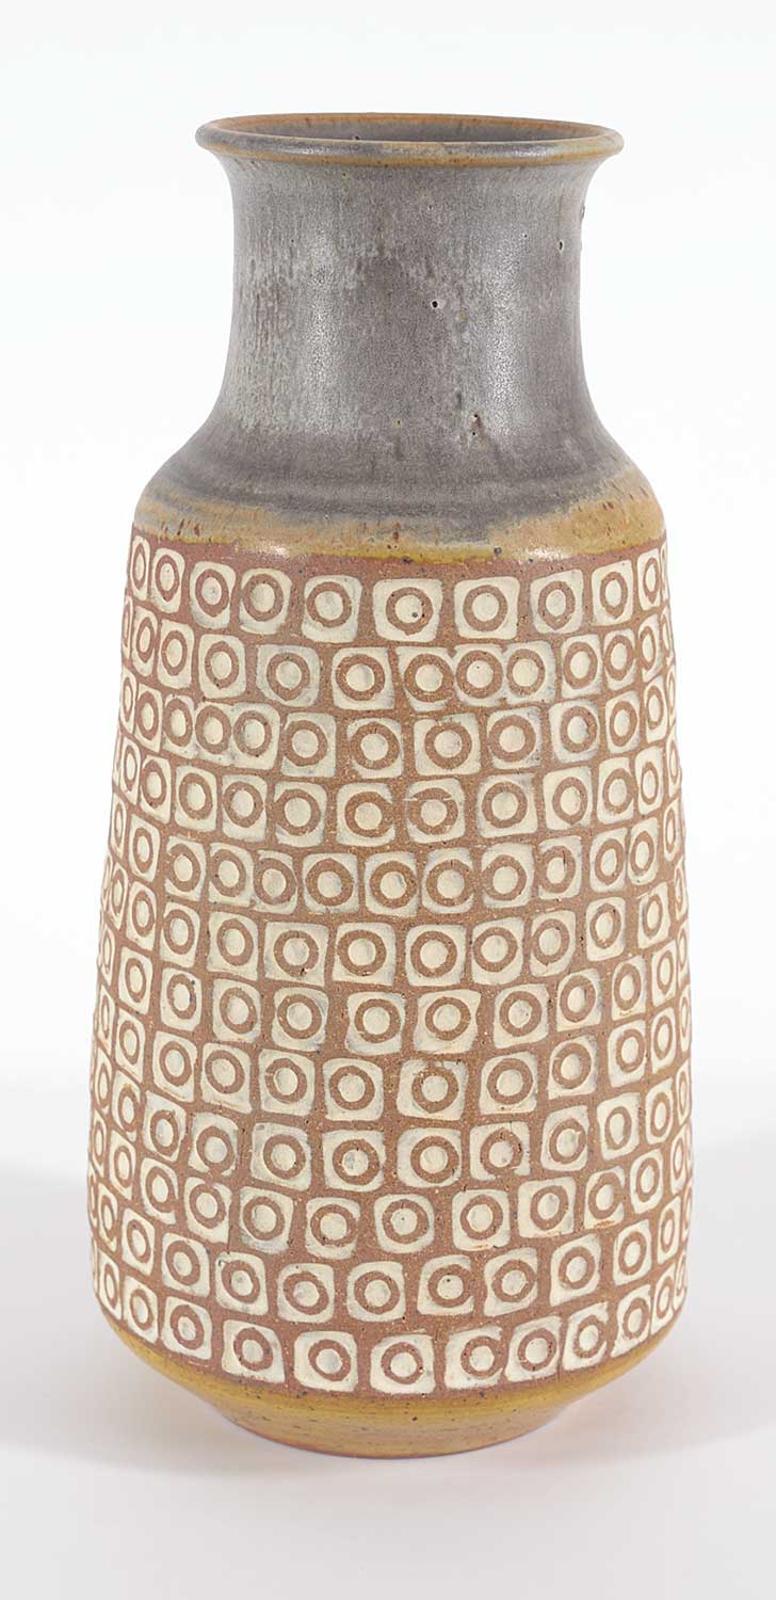 Alberta Craft Council School - Yellow and Grey Patterned Vase